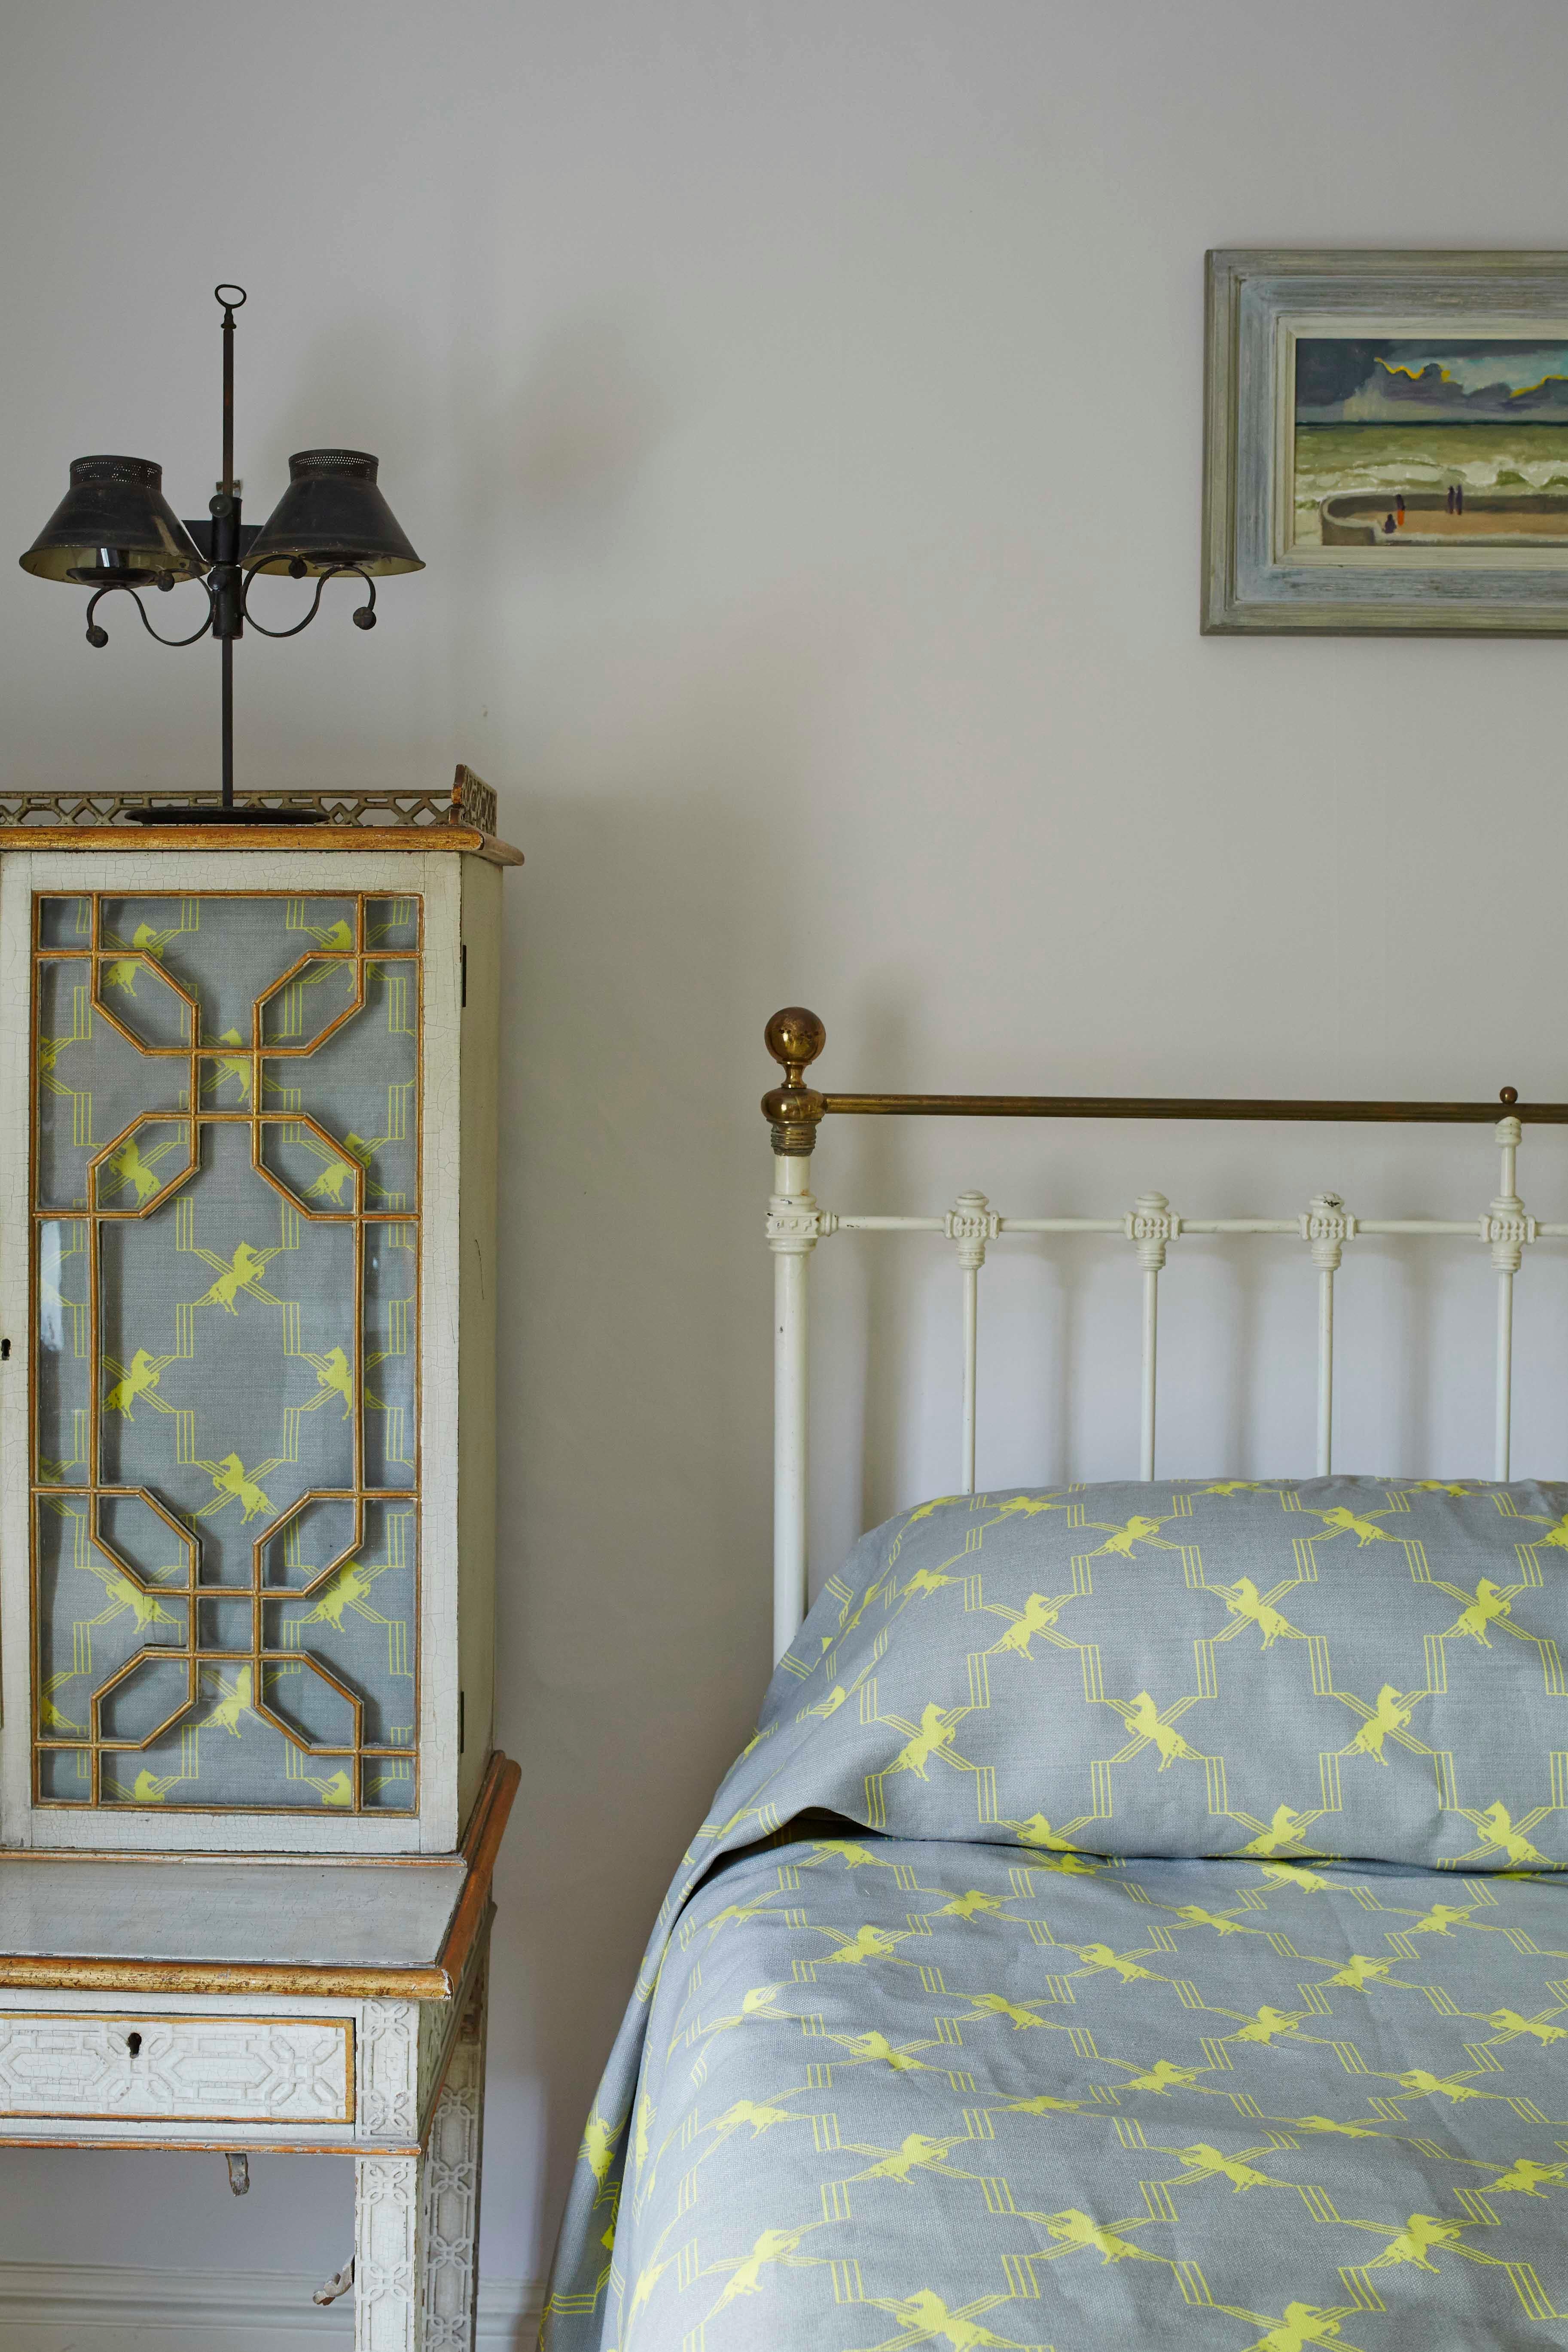 'Horse Trellis' Contemporary, Traditional Fabric in Acid Yellow on Grey In New Condition For Sale In Pewsey, Wiltshire